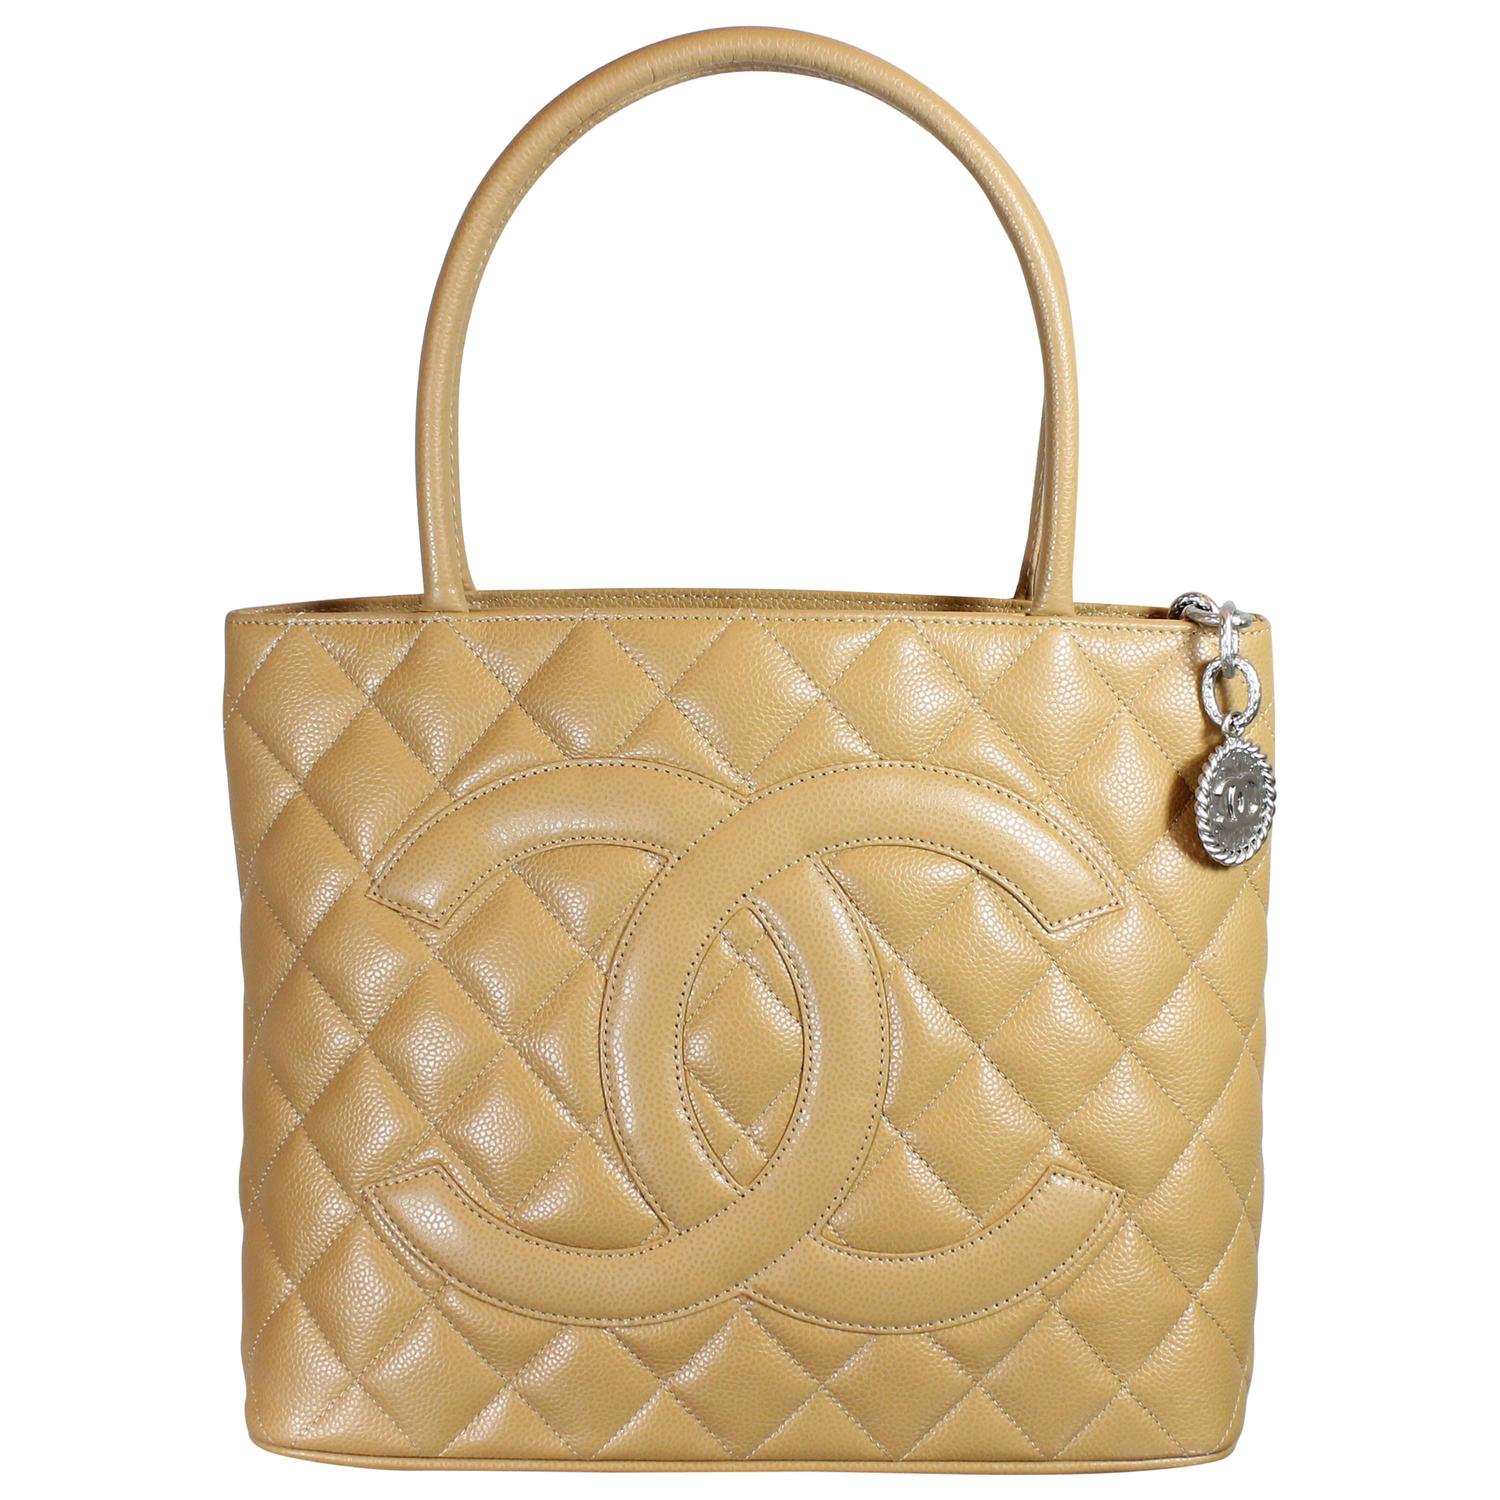 Brand New With Tags - Chanel 2000 Beige Classic Medallion Tote Bag For ...